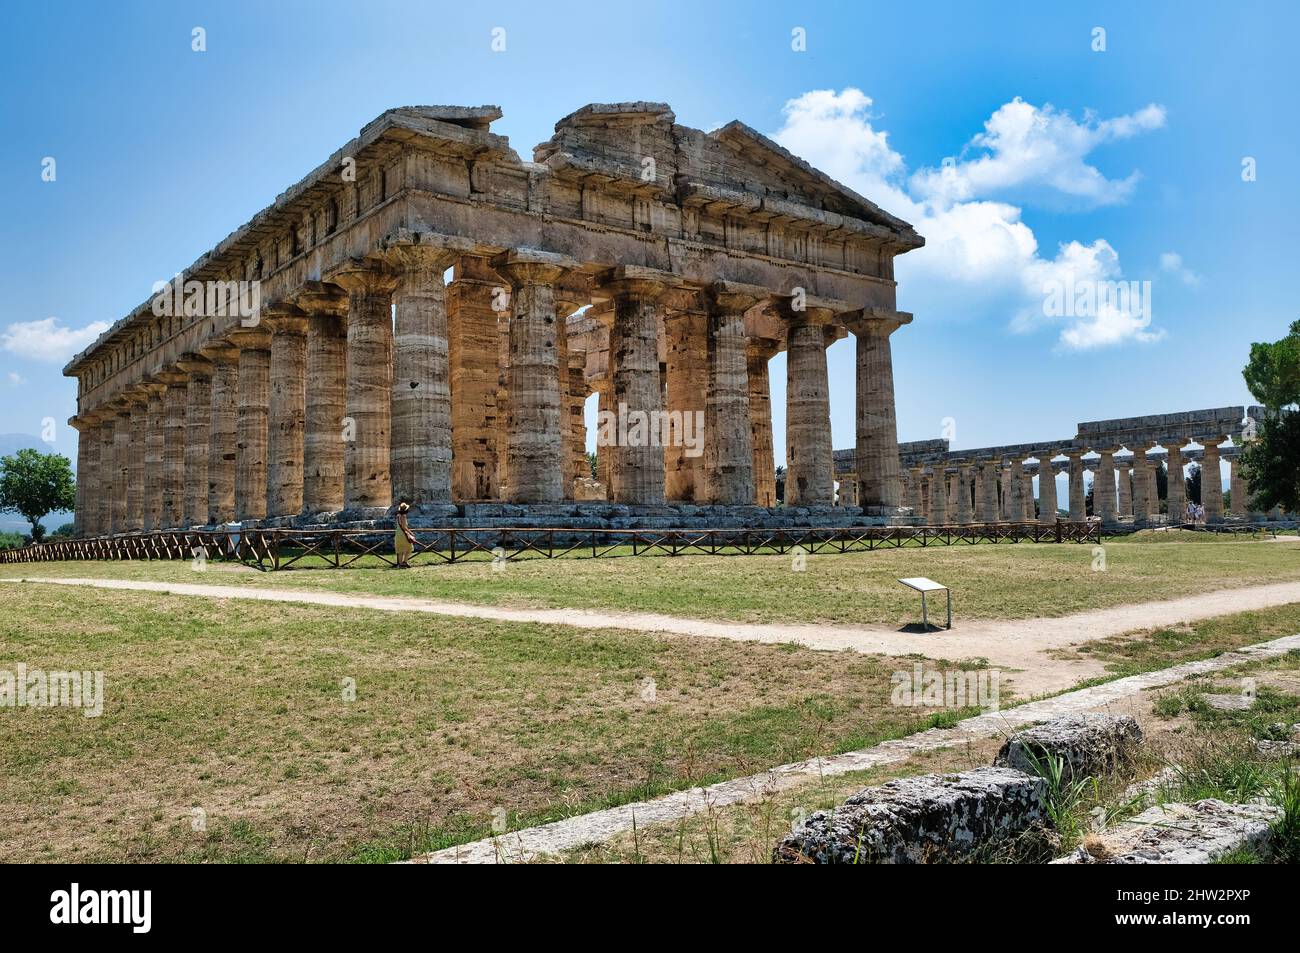 The Temple of Neptune (Temple of Poseidon) is the largest temple of the ancient polis of Paestum,  it has an extraordinarily intact architecture. Stock Photo